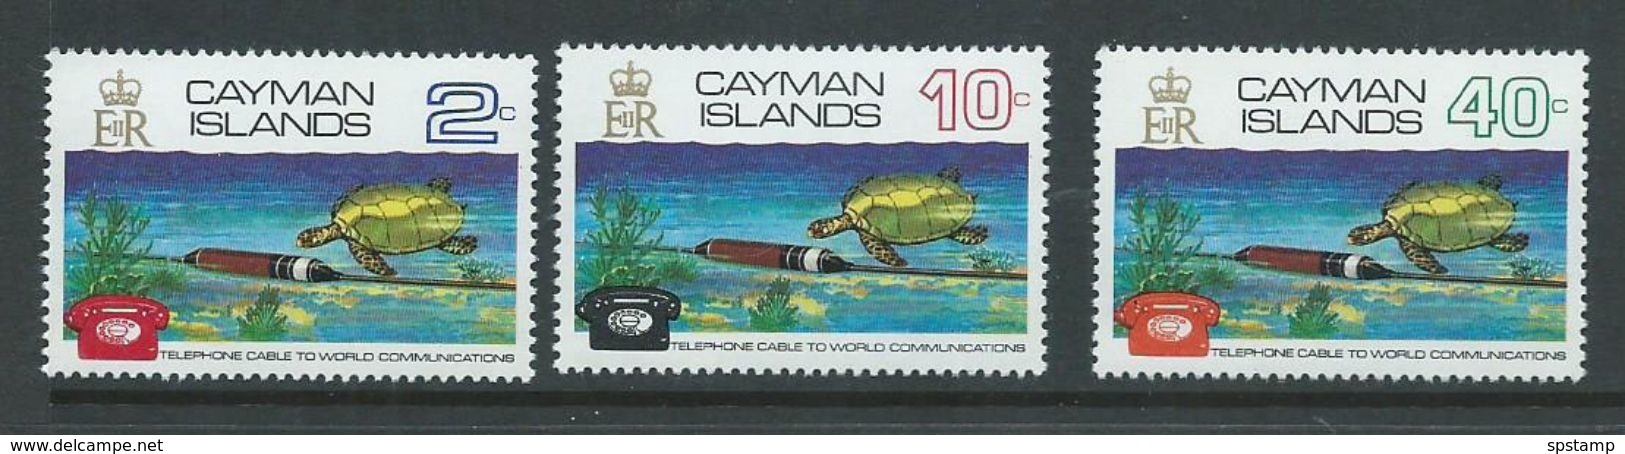 Cayman Islands 1972 Telephone Cable Set 3 MNH - Cayman (Isole)